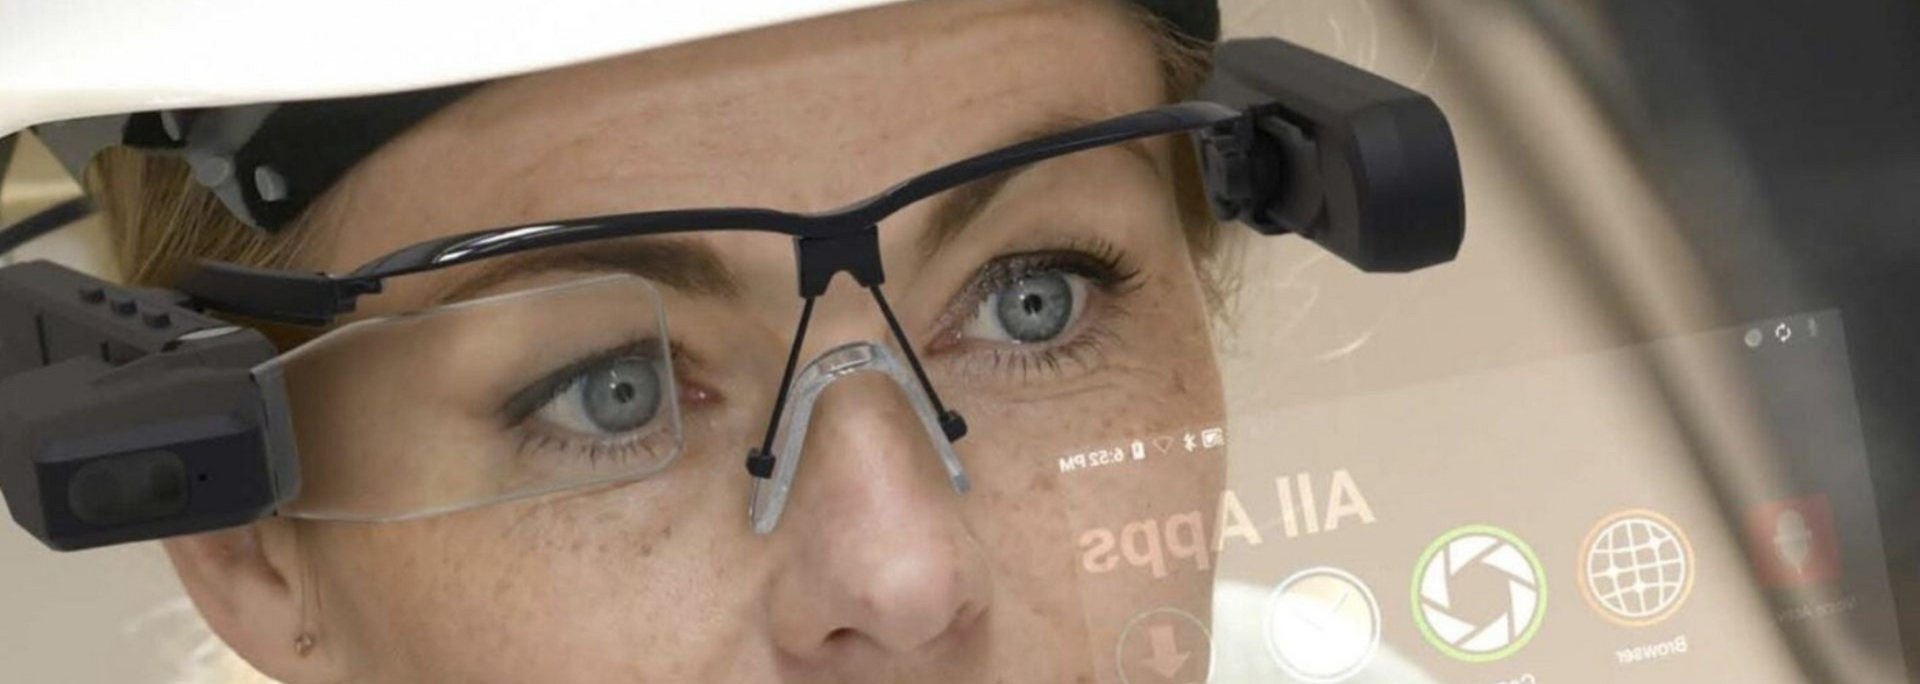 Picture of someone in an industrial setting using smart glasses